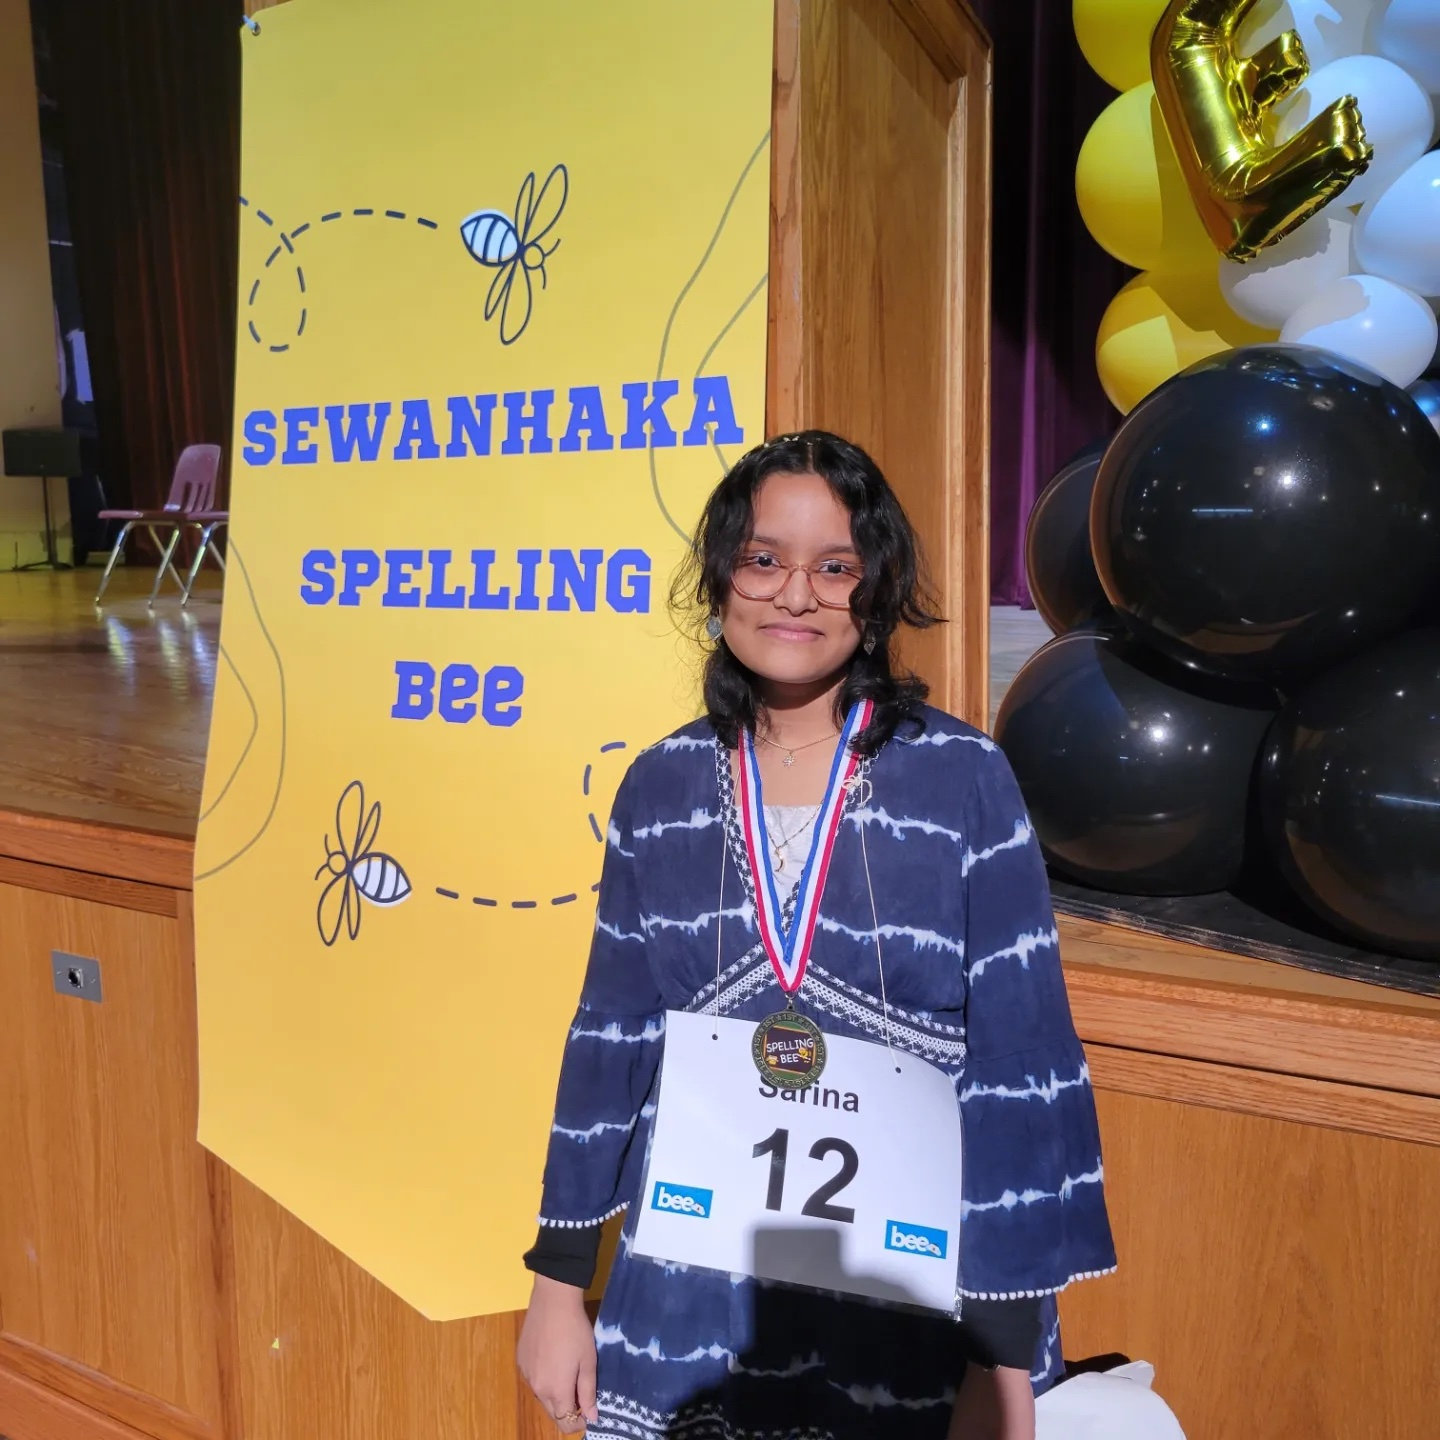 Sewanhaka High School student Sarina Jubaer was selected as the eighth grade winner of the spelling bee on Jan. 13.